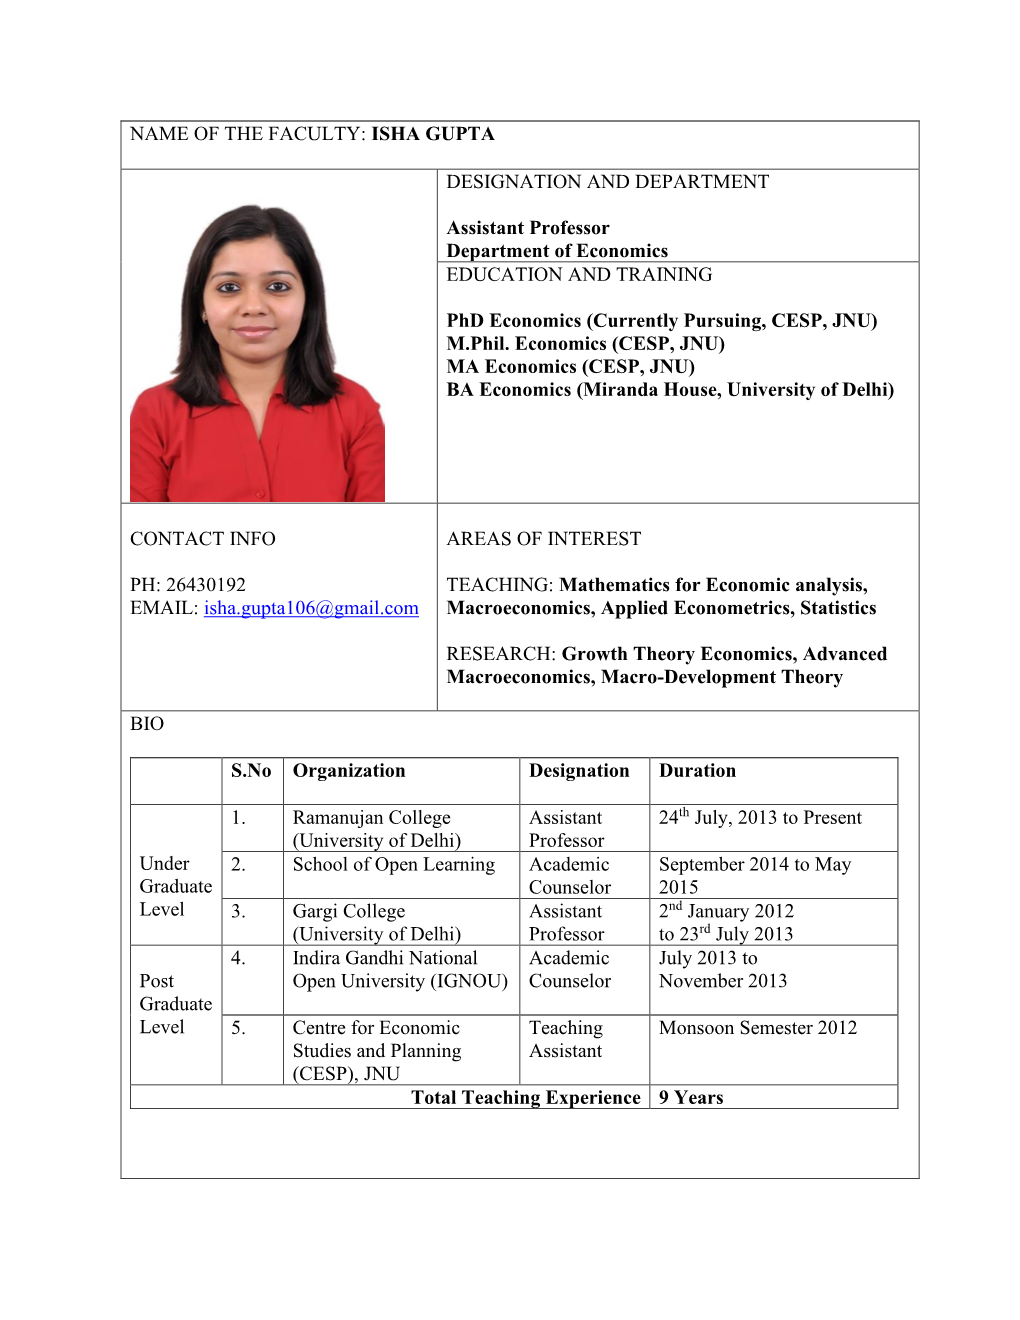 NAME of the FACULTY: ISHA GUPTA DESIGNATION and DEPARTMENT Assistant Professor Department of Economics EDUCATION and TRAINING Ph